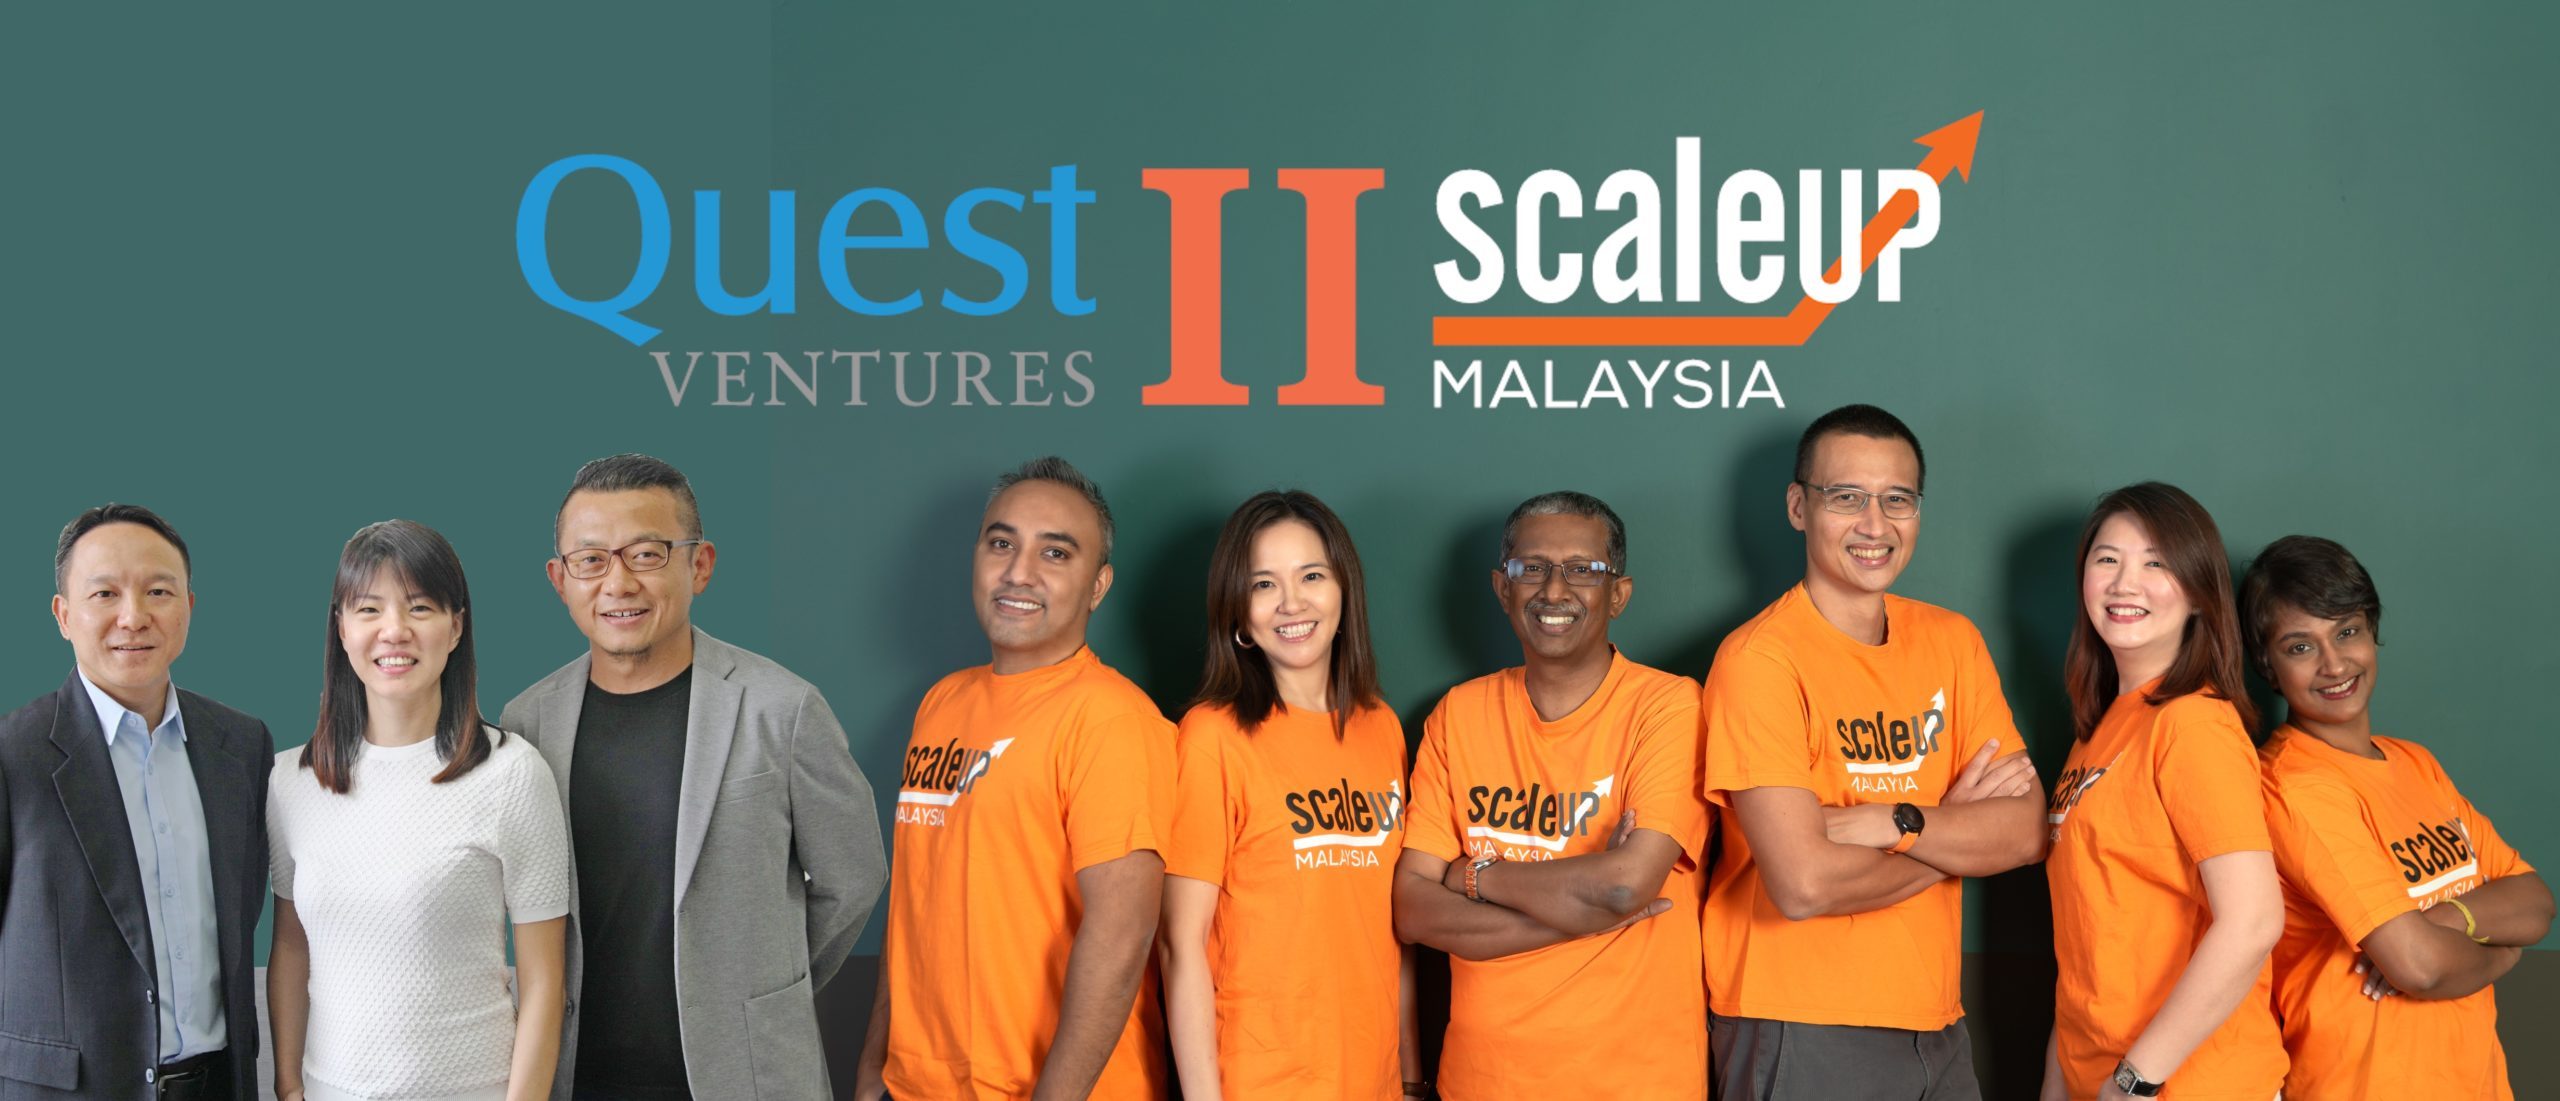 ScaleUp Malaysia partners SG's Quest Ventures to nurture local startups